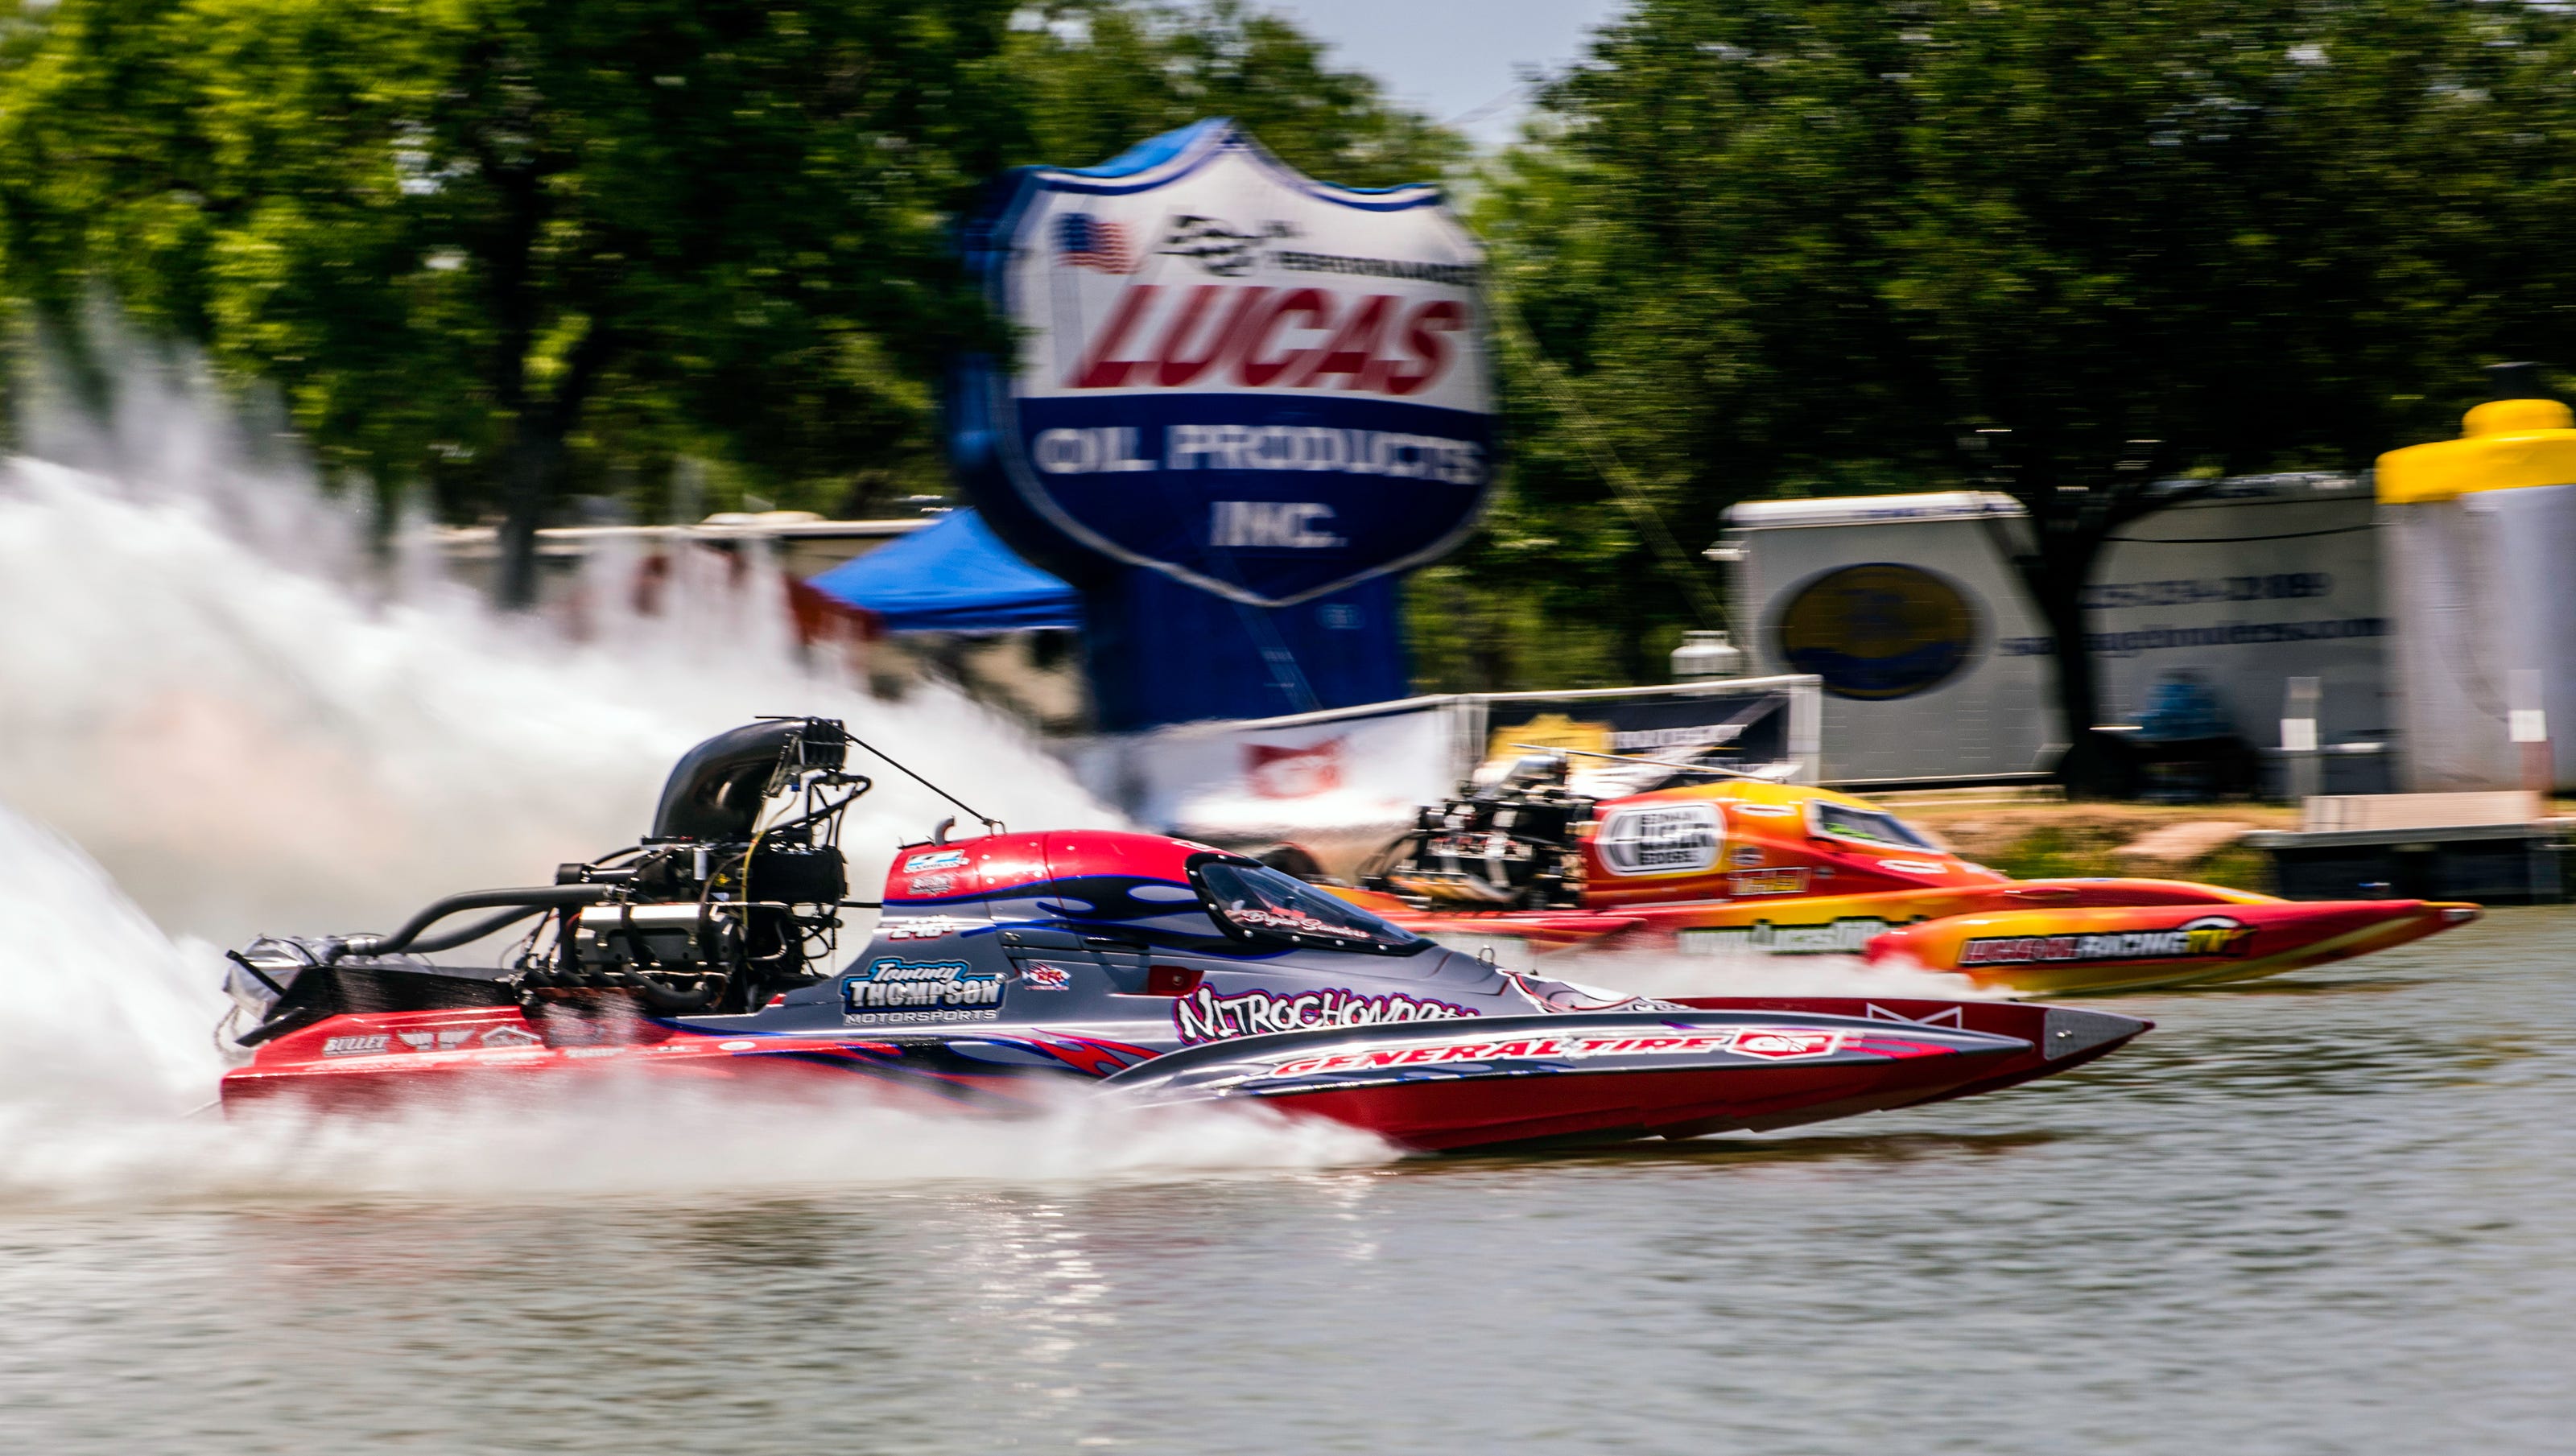 Lucas Oil Drag Boat Schedule 2022 Lucas Oil Drag Boat Racing Will End After 2018